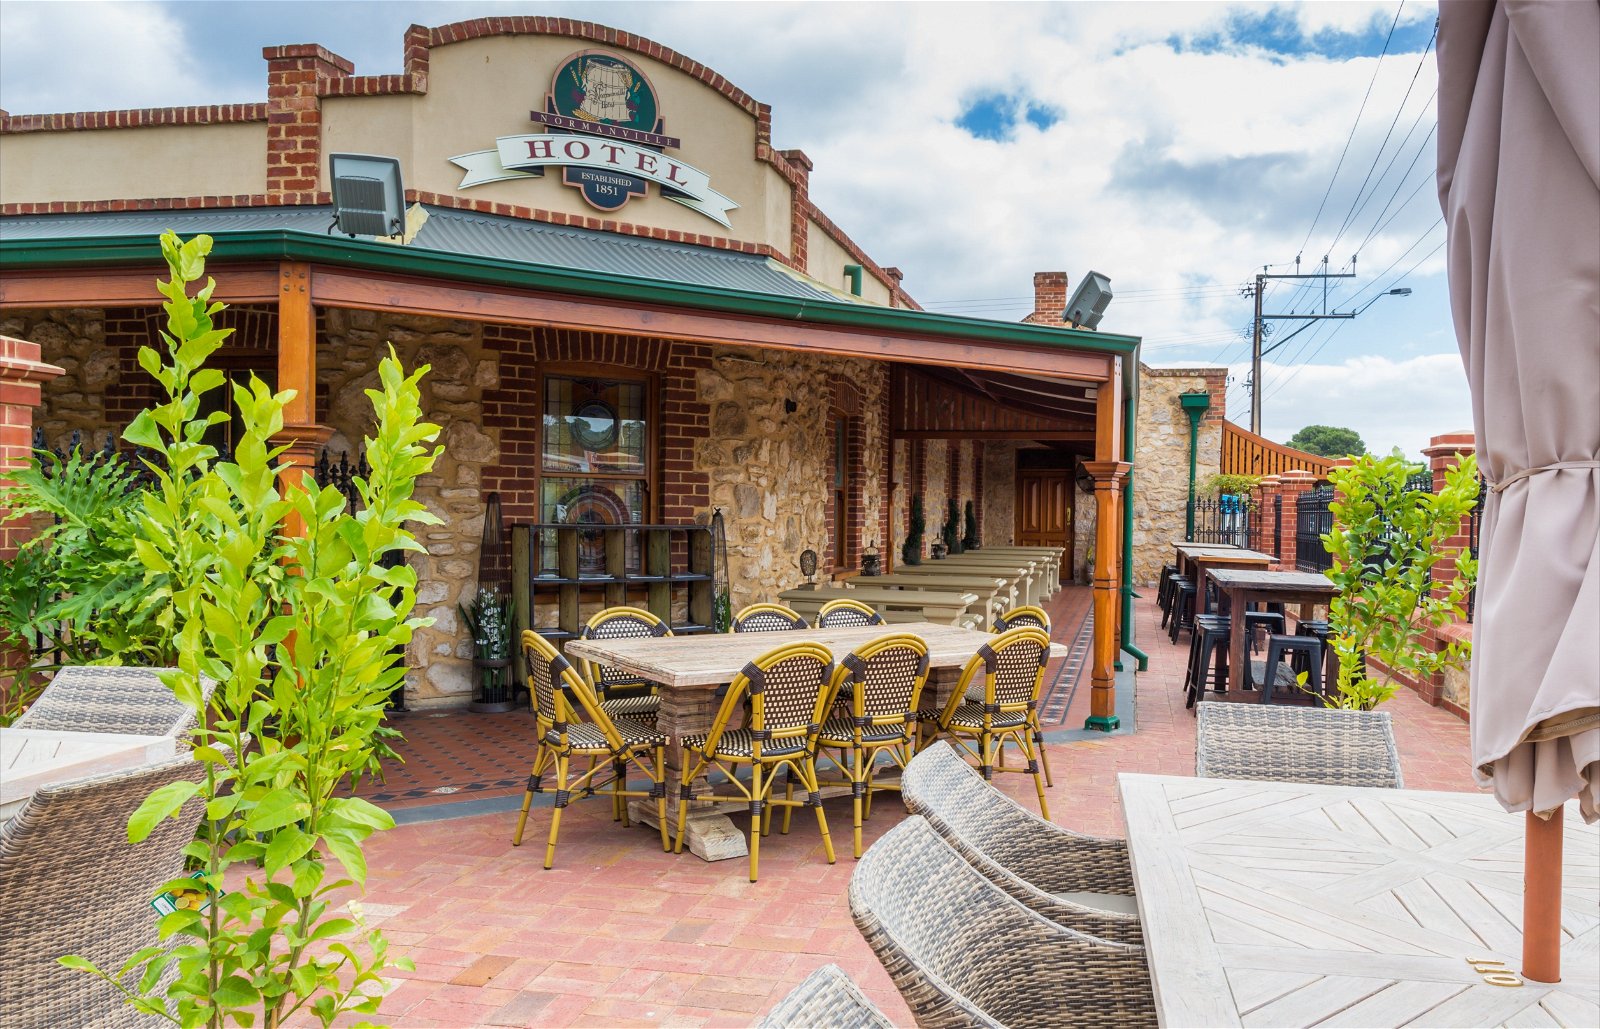 Normanville Hotel - Broome Tourism